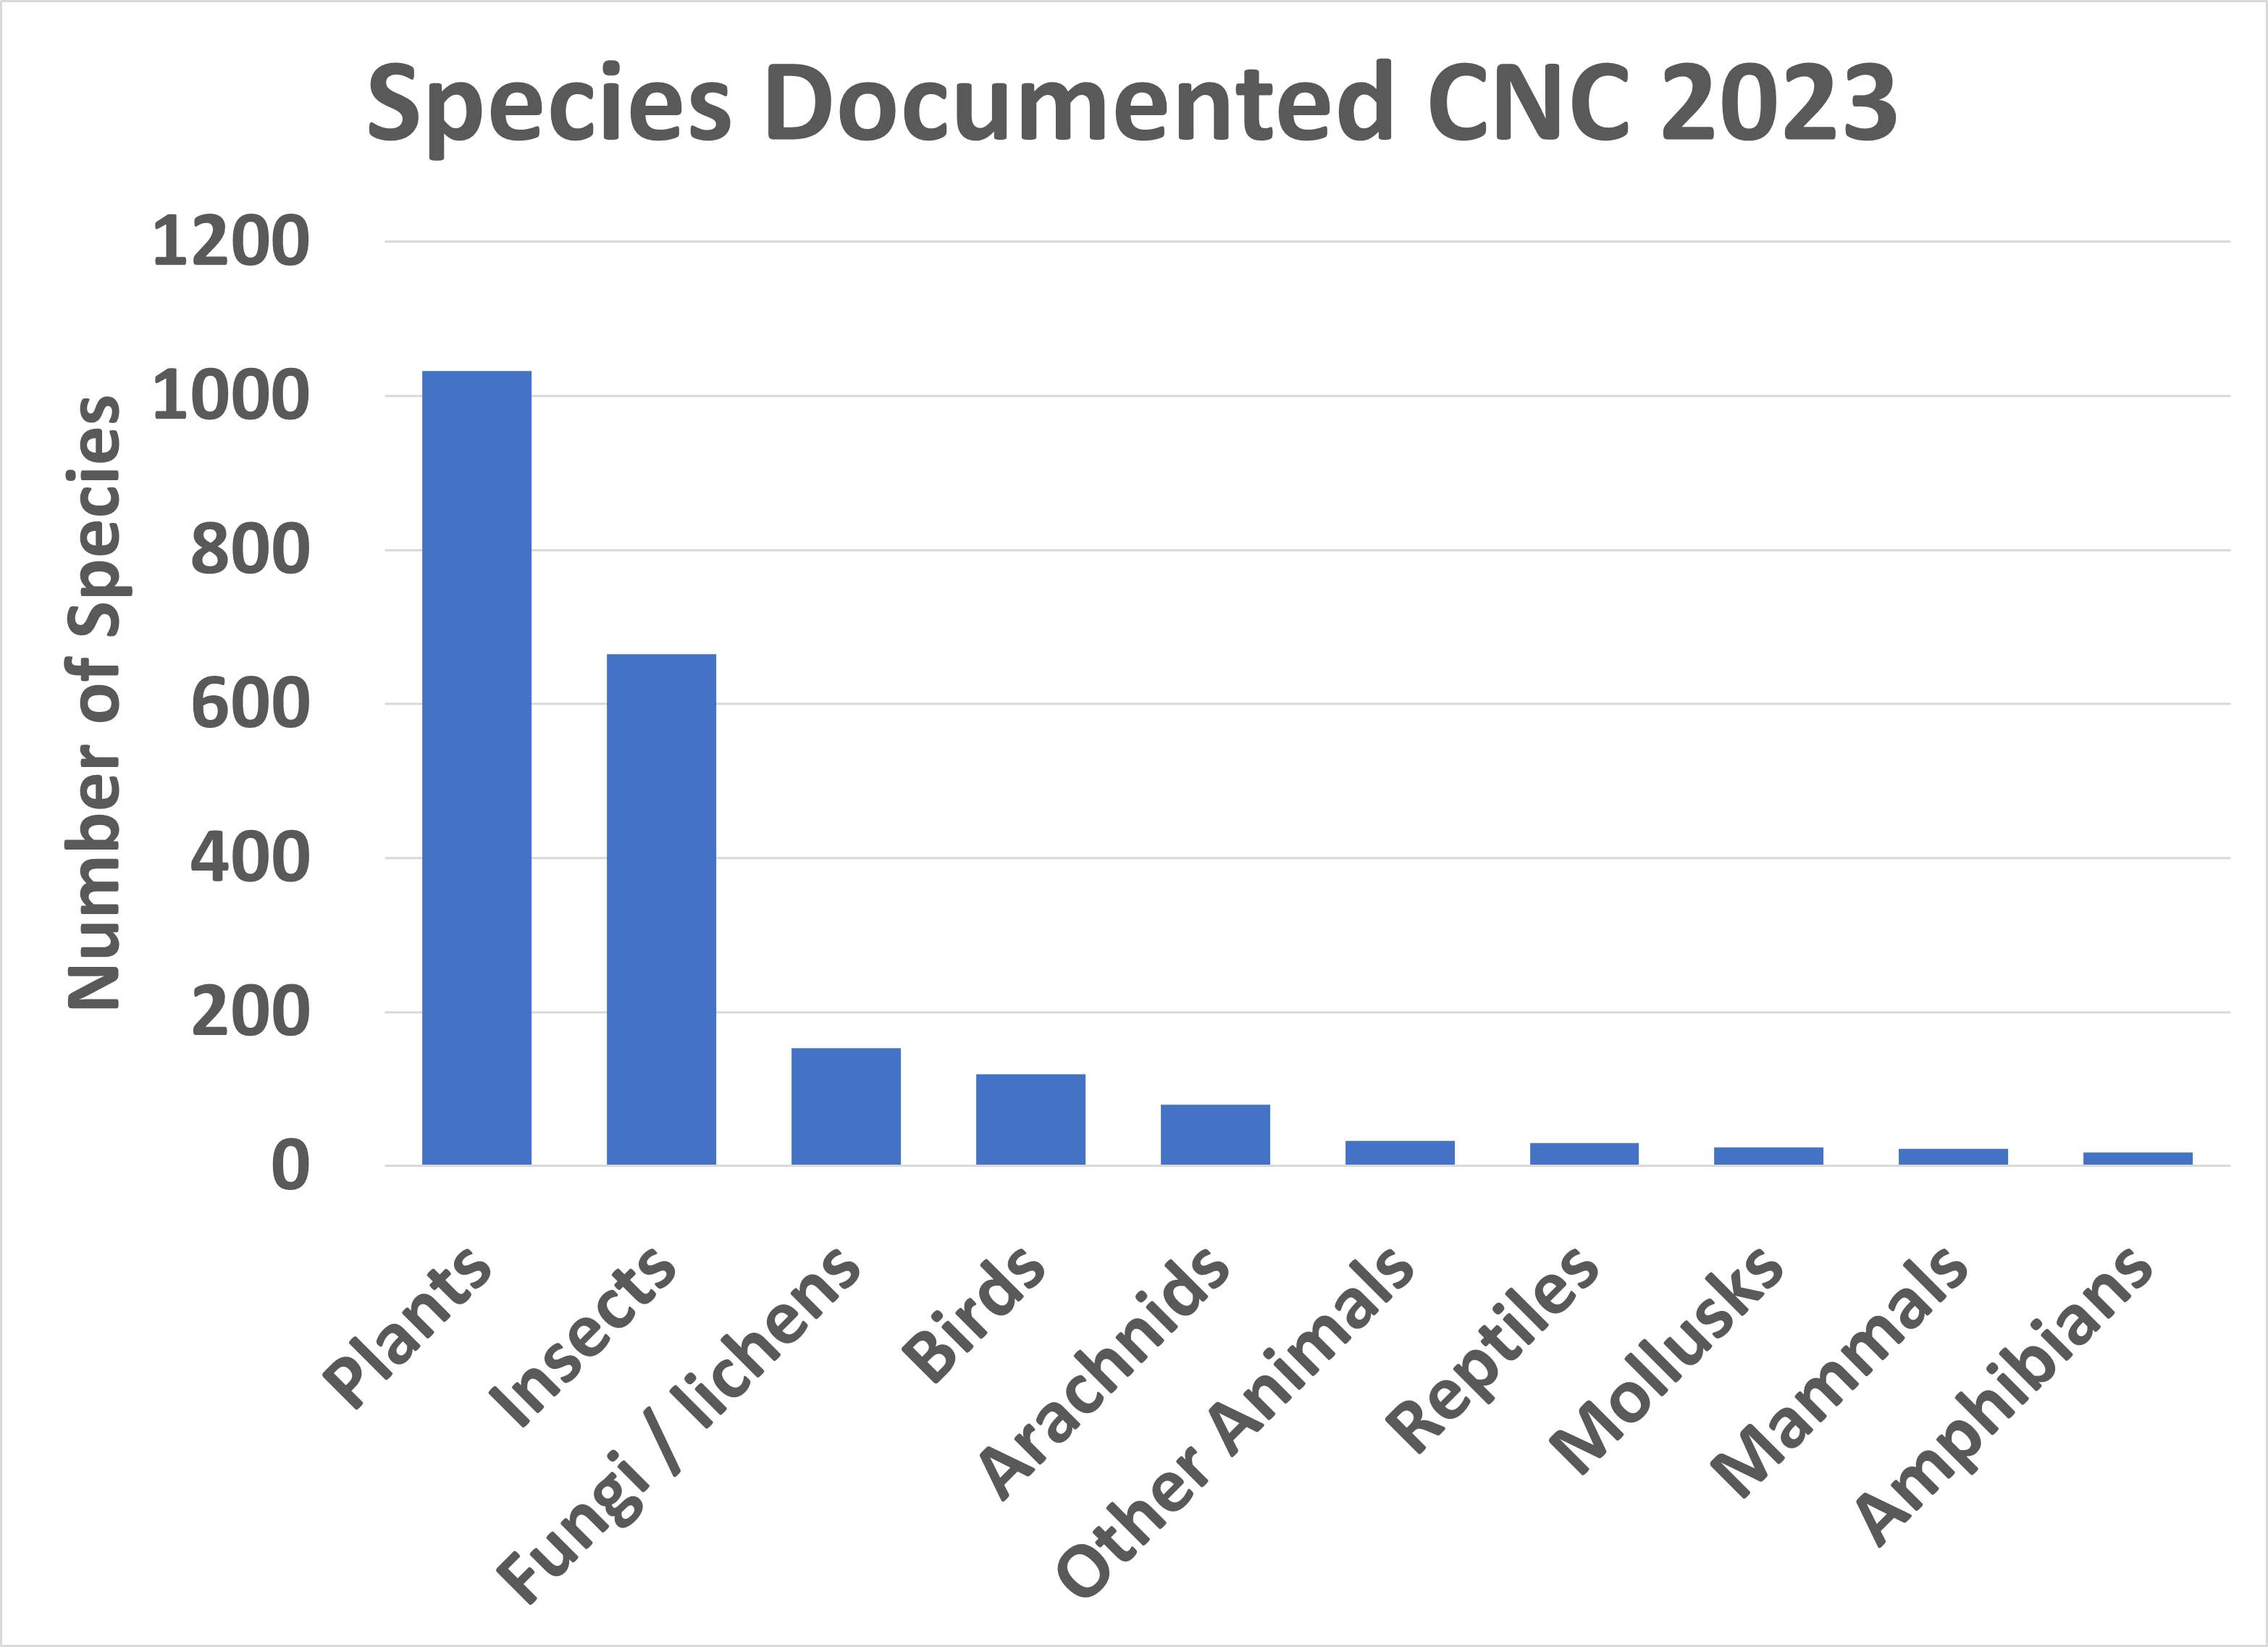 Graph of the number of species reported for each major taxon